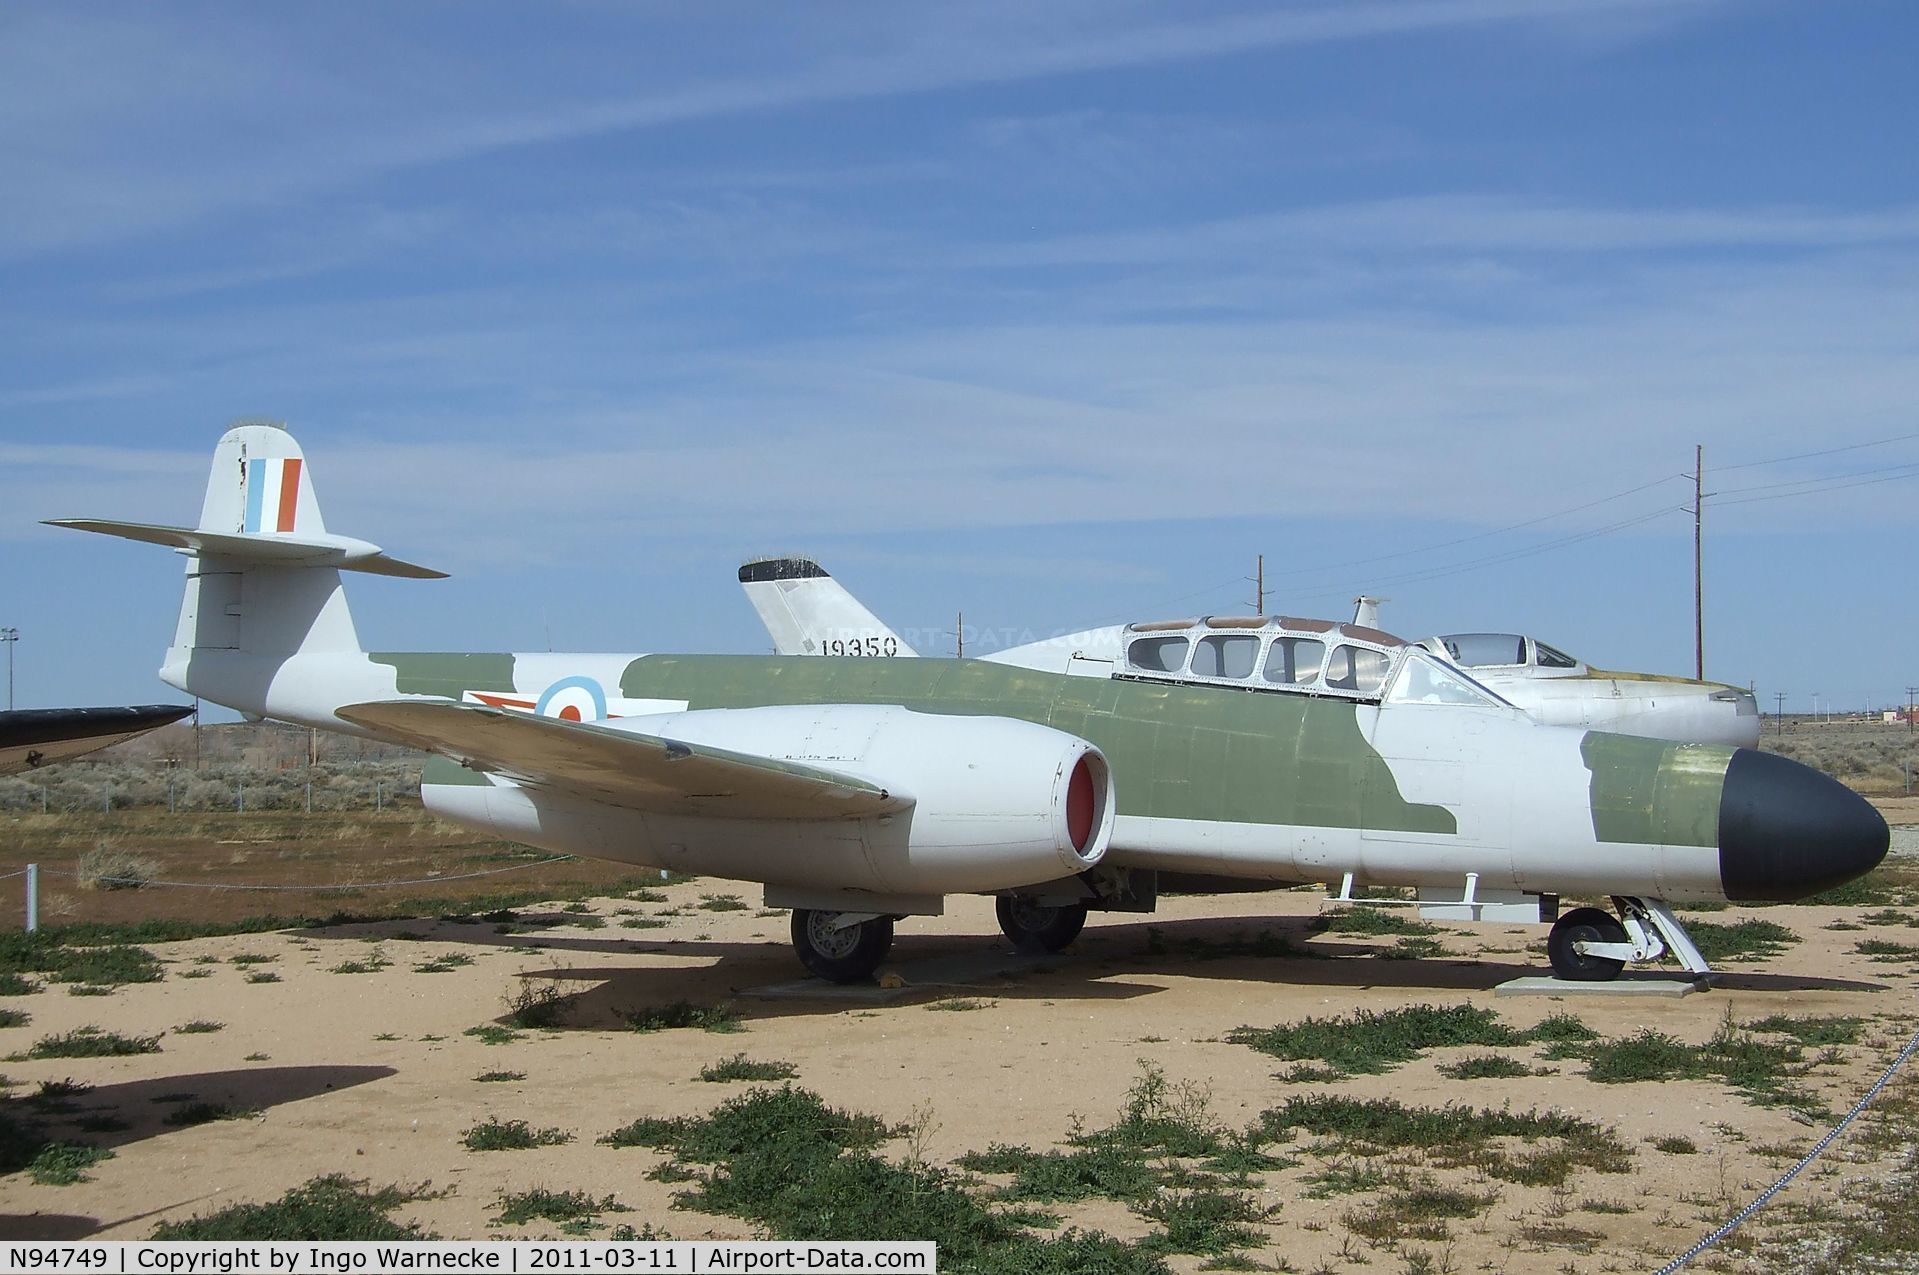 N94749, 1951 Gloster Meteor NF.11 C/N Not found N94749, Gloster Meteor NF11 / TT20 at the Air Force Flight Test Center Museum, Edwards AFB CA